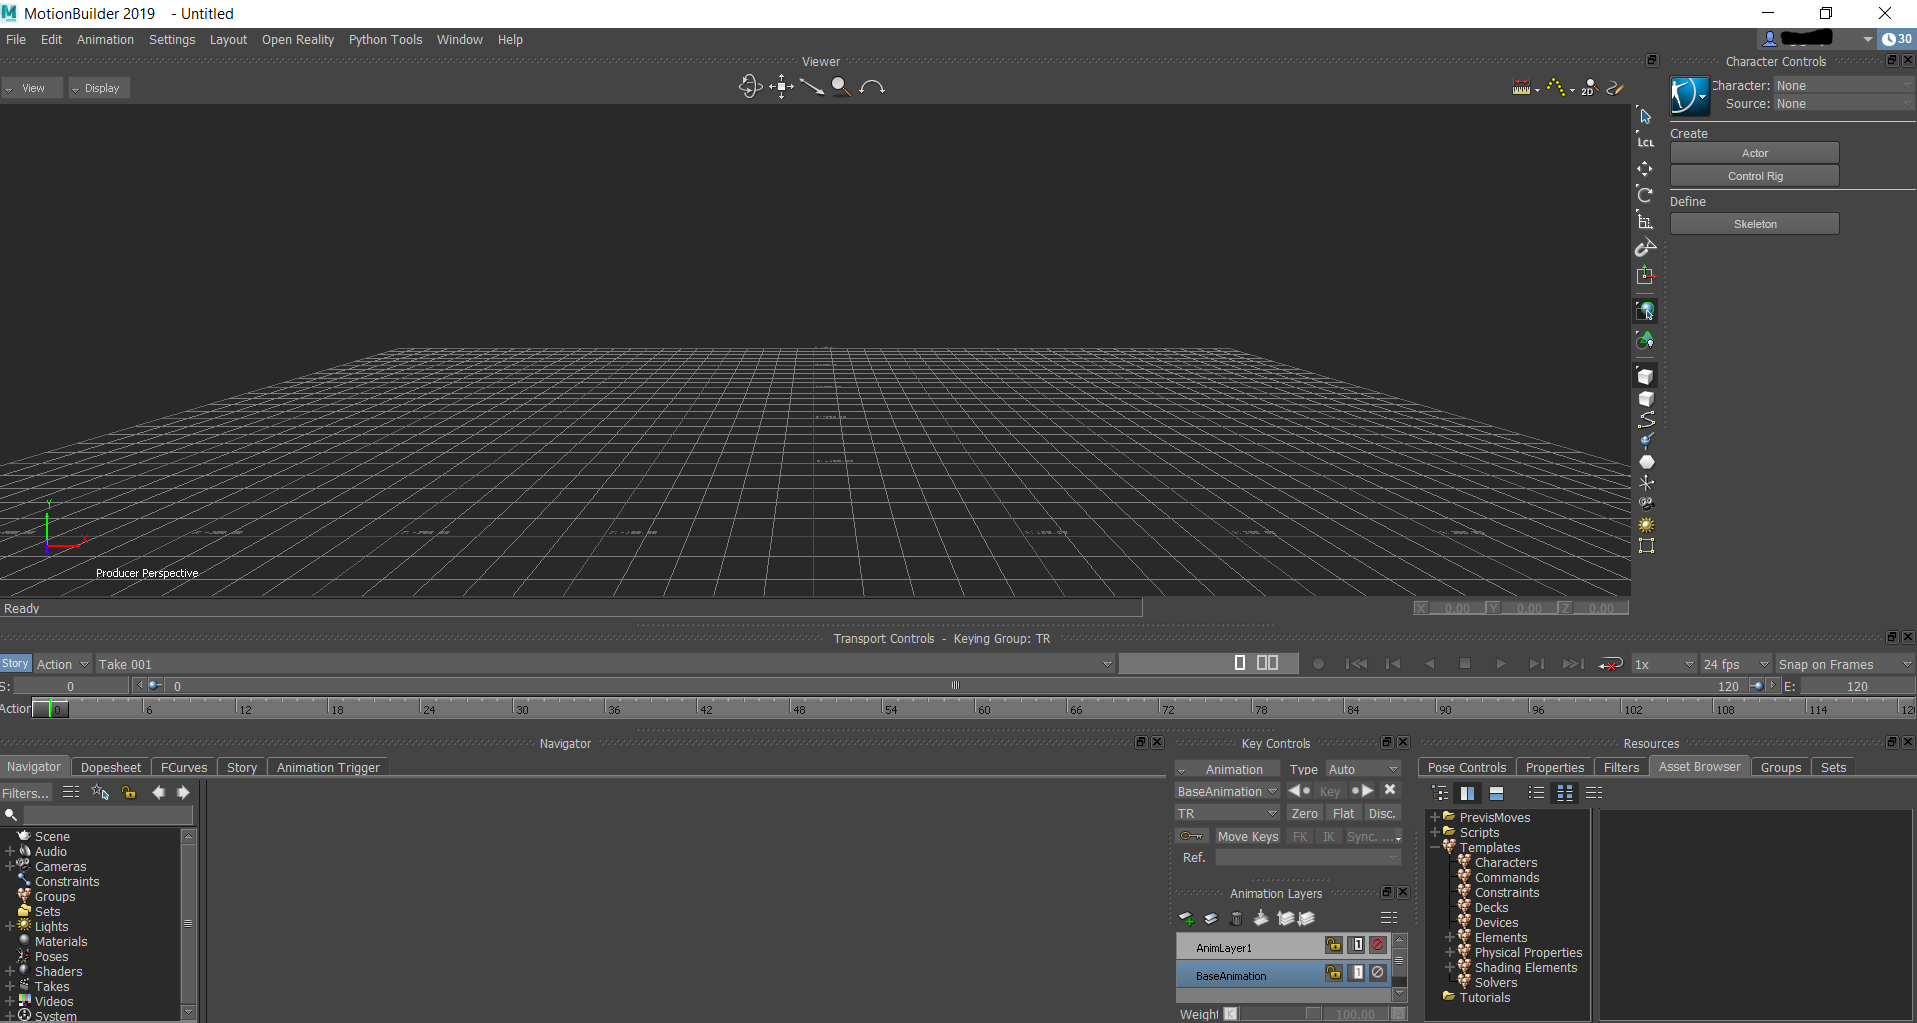 download Motiongraph for Xper